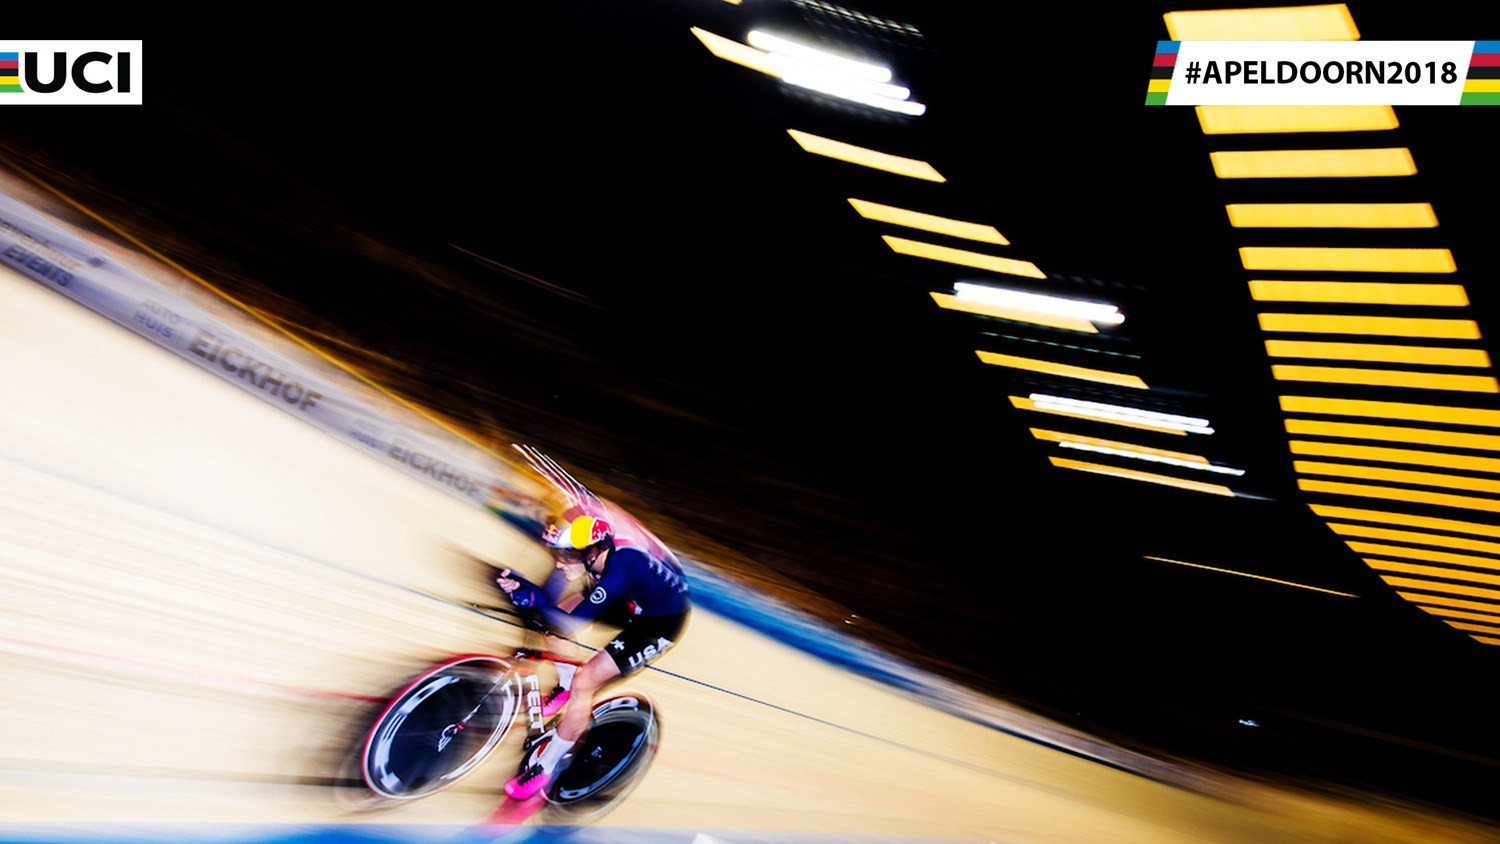 Chloe Dygert of the US twice broke the women's Individual Pursuit world record at the UCI Track World Championships in Apeldoorn ©UCI